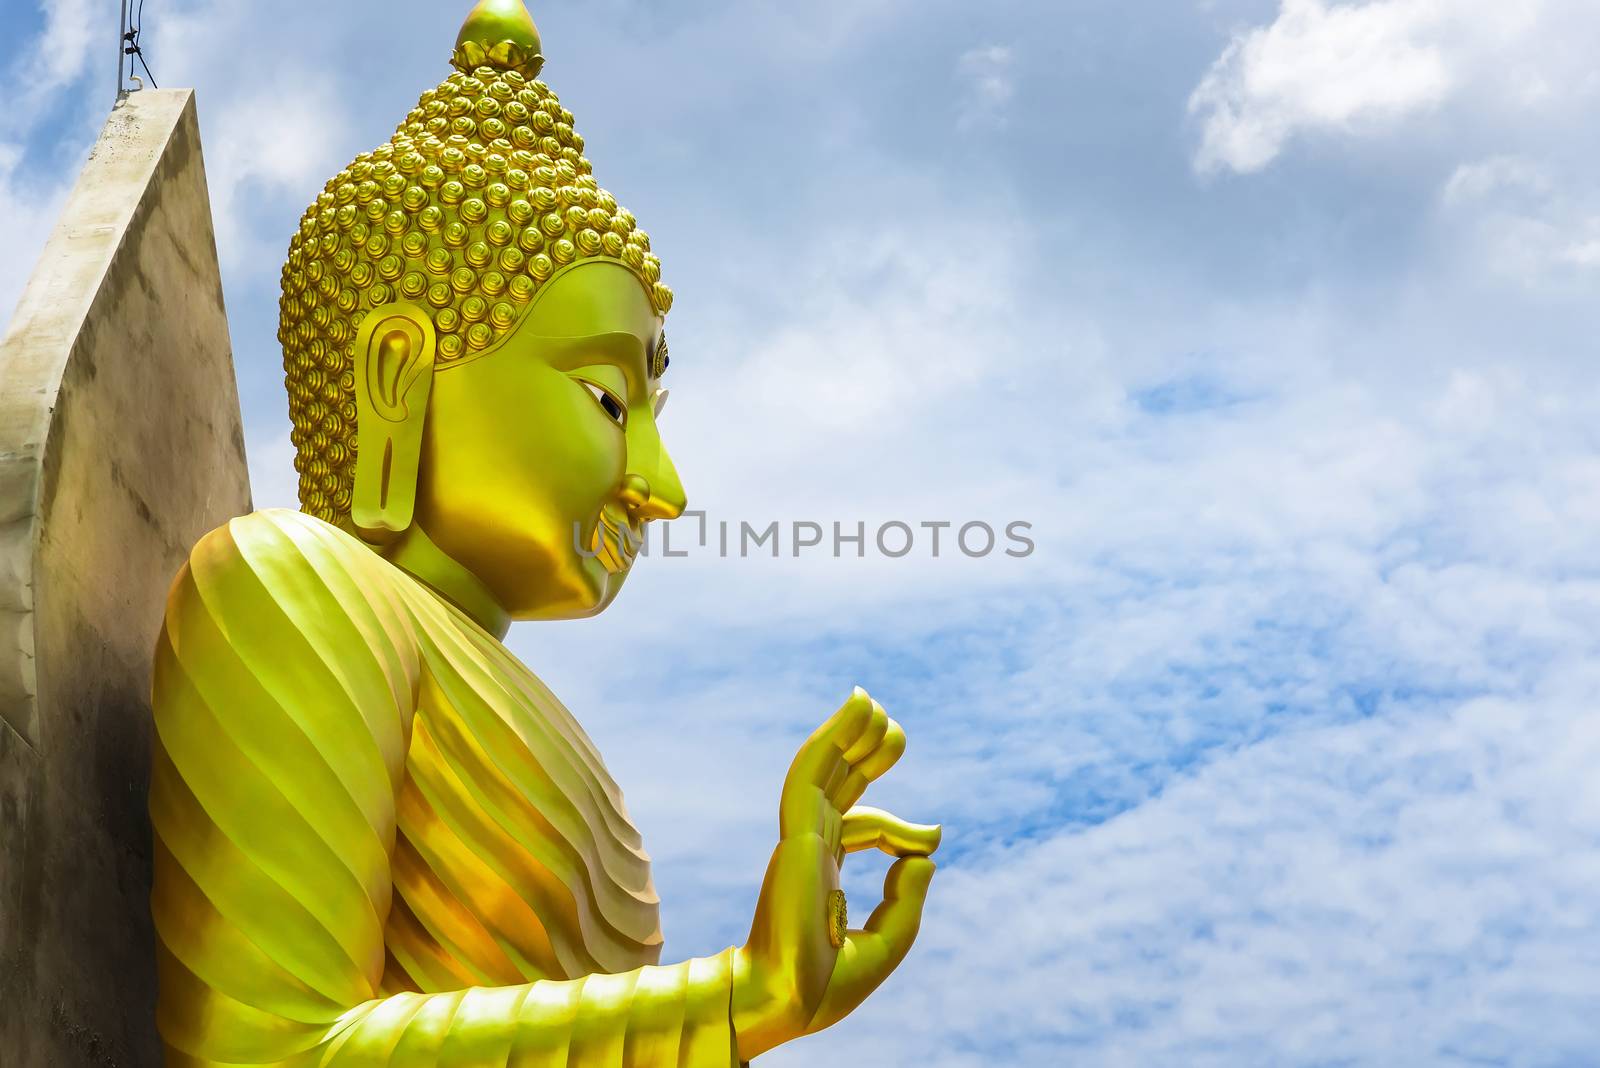 Big Goldden Buddha statue of Chareon Rat Bamrung Temple (Nong Phong Nok Temple) the place of faith in Thailand